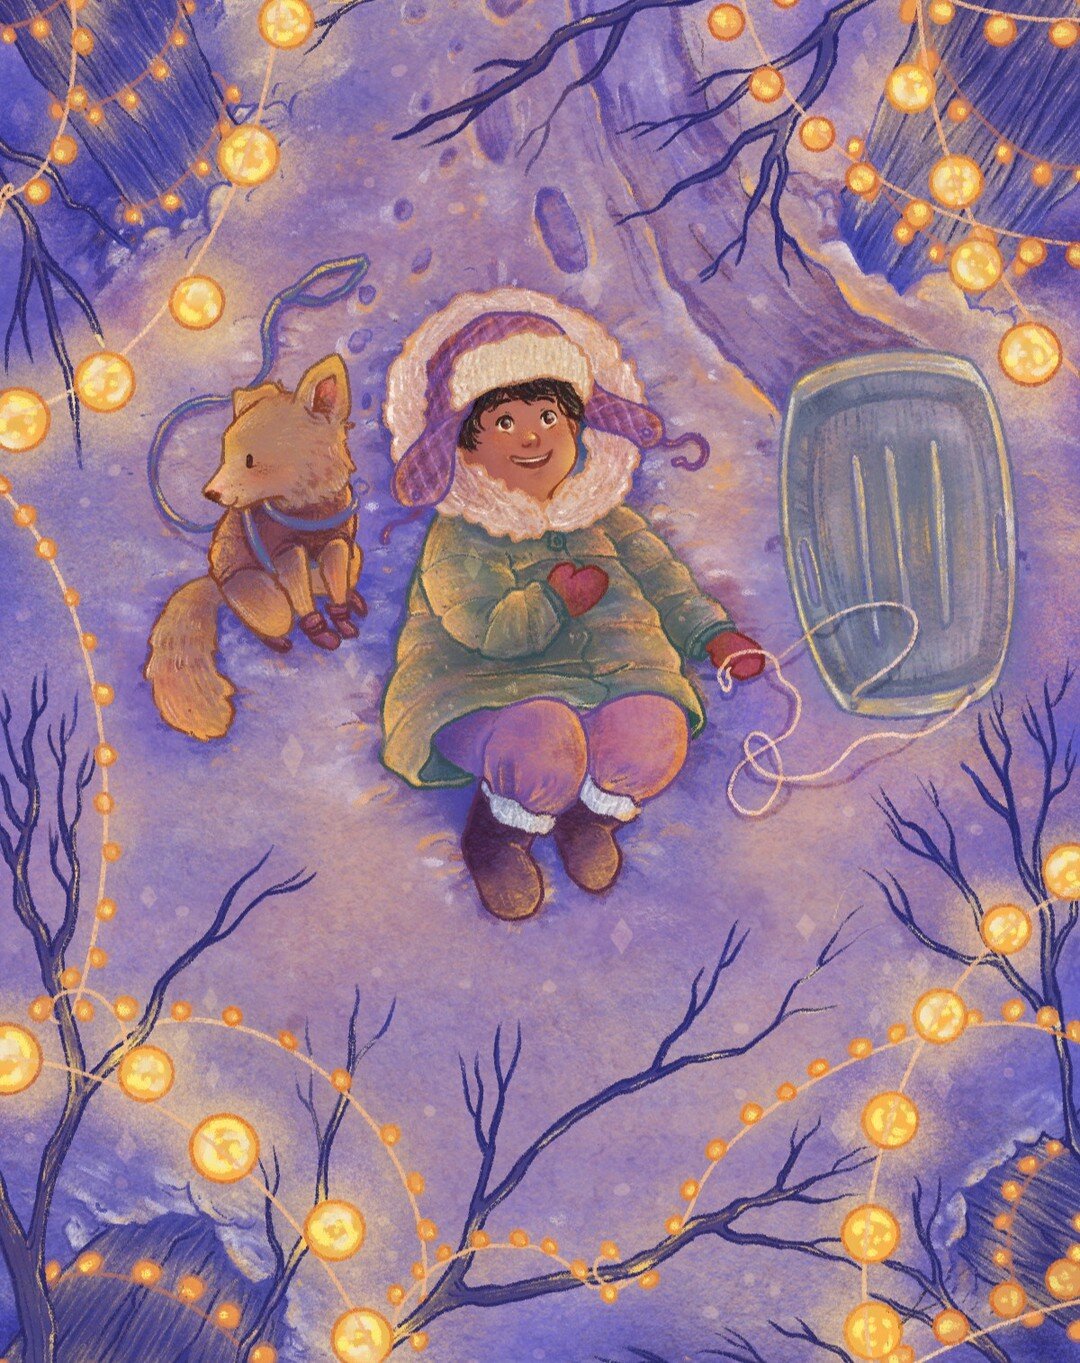 Happy new year &amp; happy #kidlitpostcard day, lovelies! I hope that you have had a good start to your new year, and that 2024 has treated you kindly so far. 💜

If any wonderful art directors or editors happen to stumble upon this illustration, my 